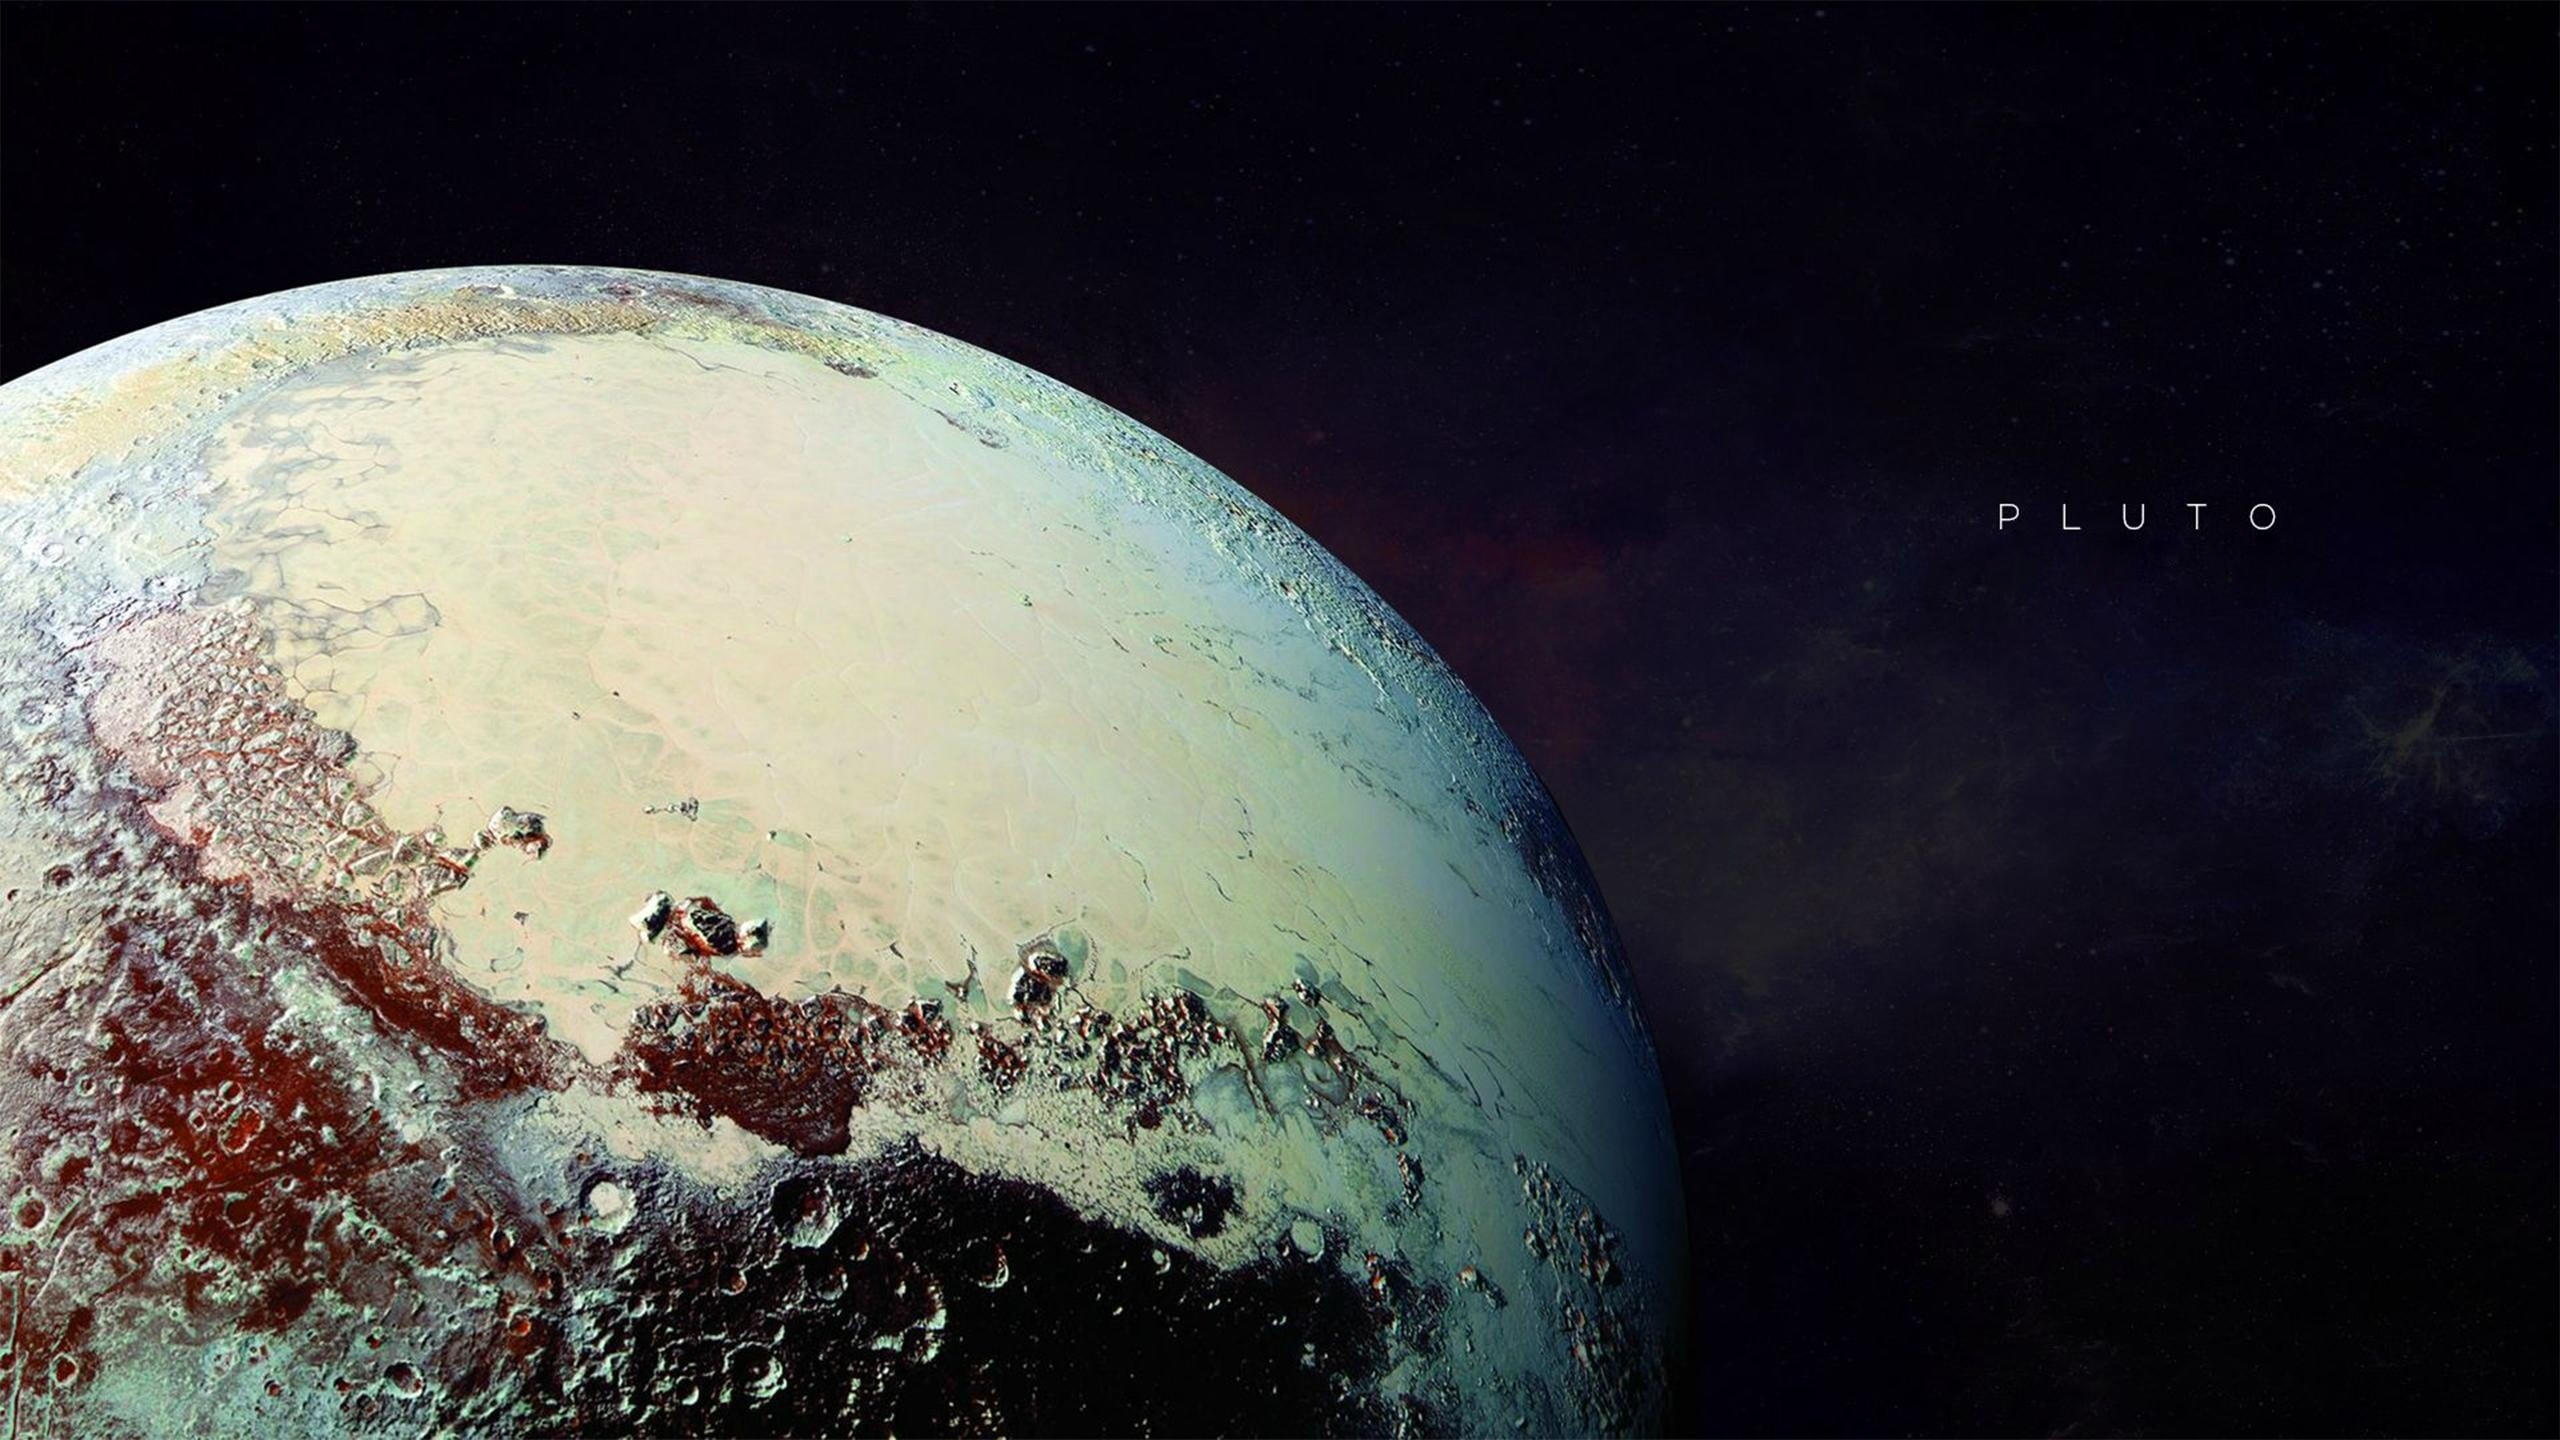 Pluto: Space, The Solar System, A dwarf planet, was discovered in 1930, the first object in the Kuiper belt. 2560x1440 HD Wallpaper.